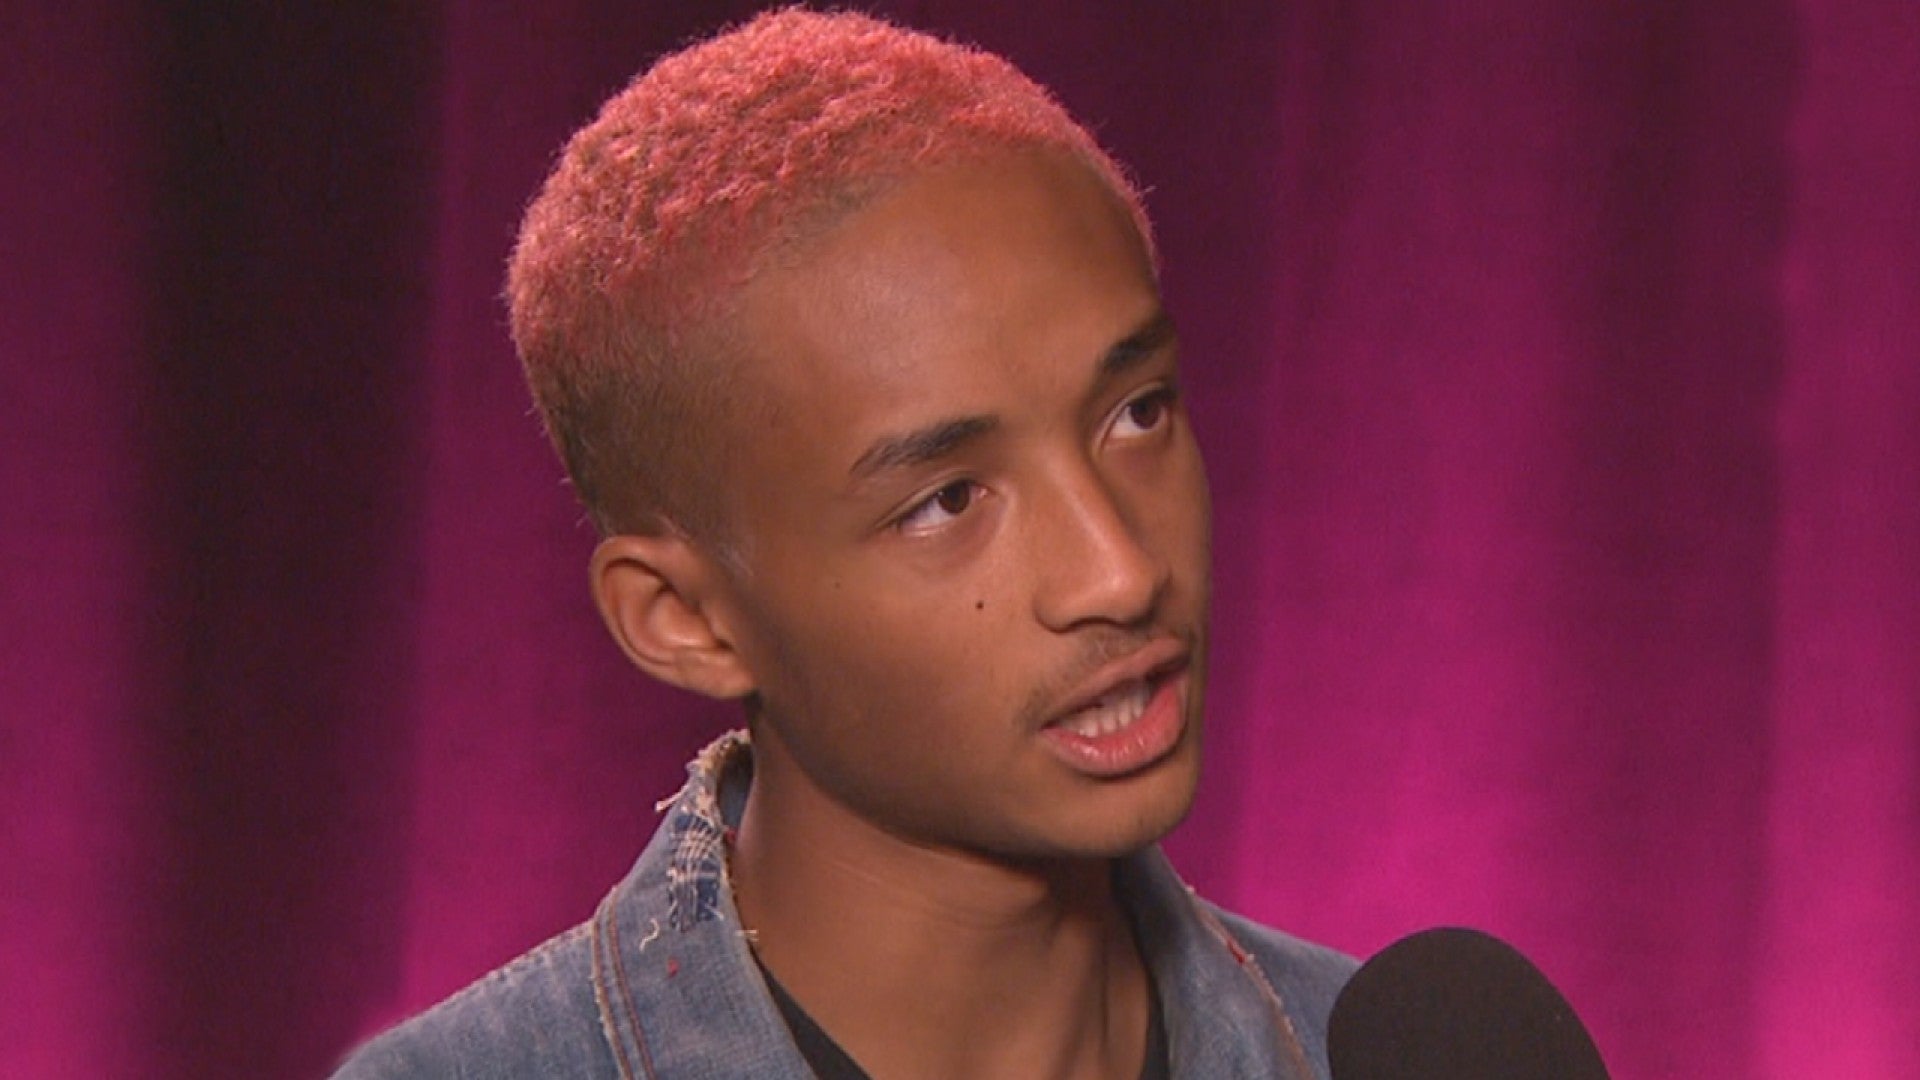 EXCLUSIVE Jaden Smith on What His Famous Parents Really Think of Him Growing Up and Moving